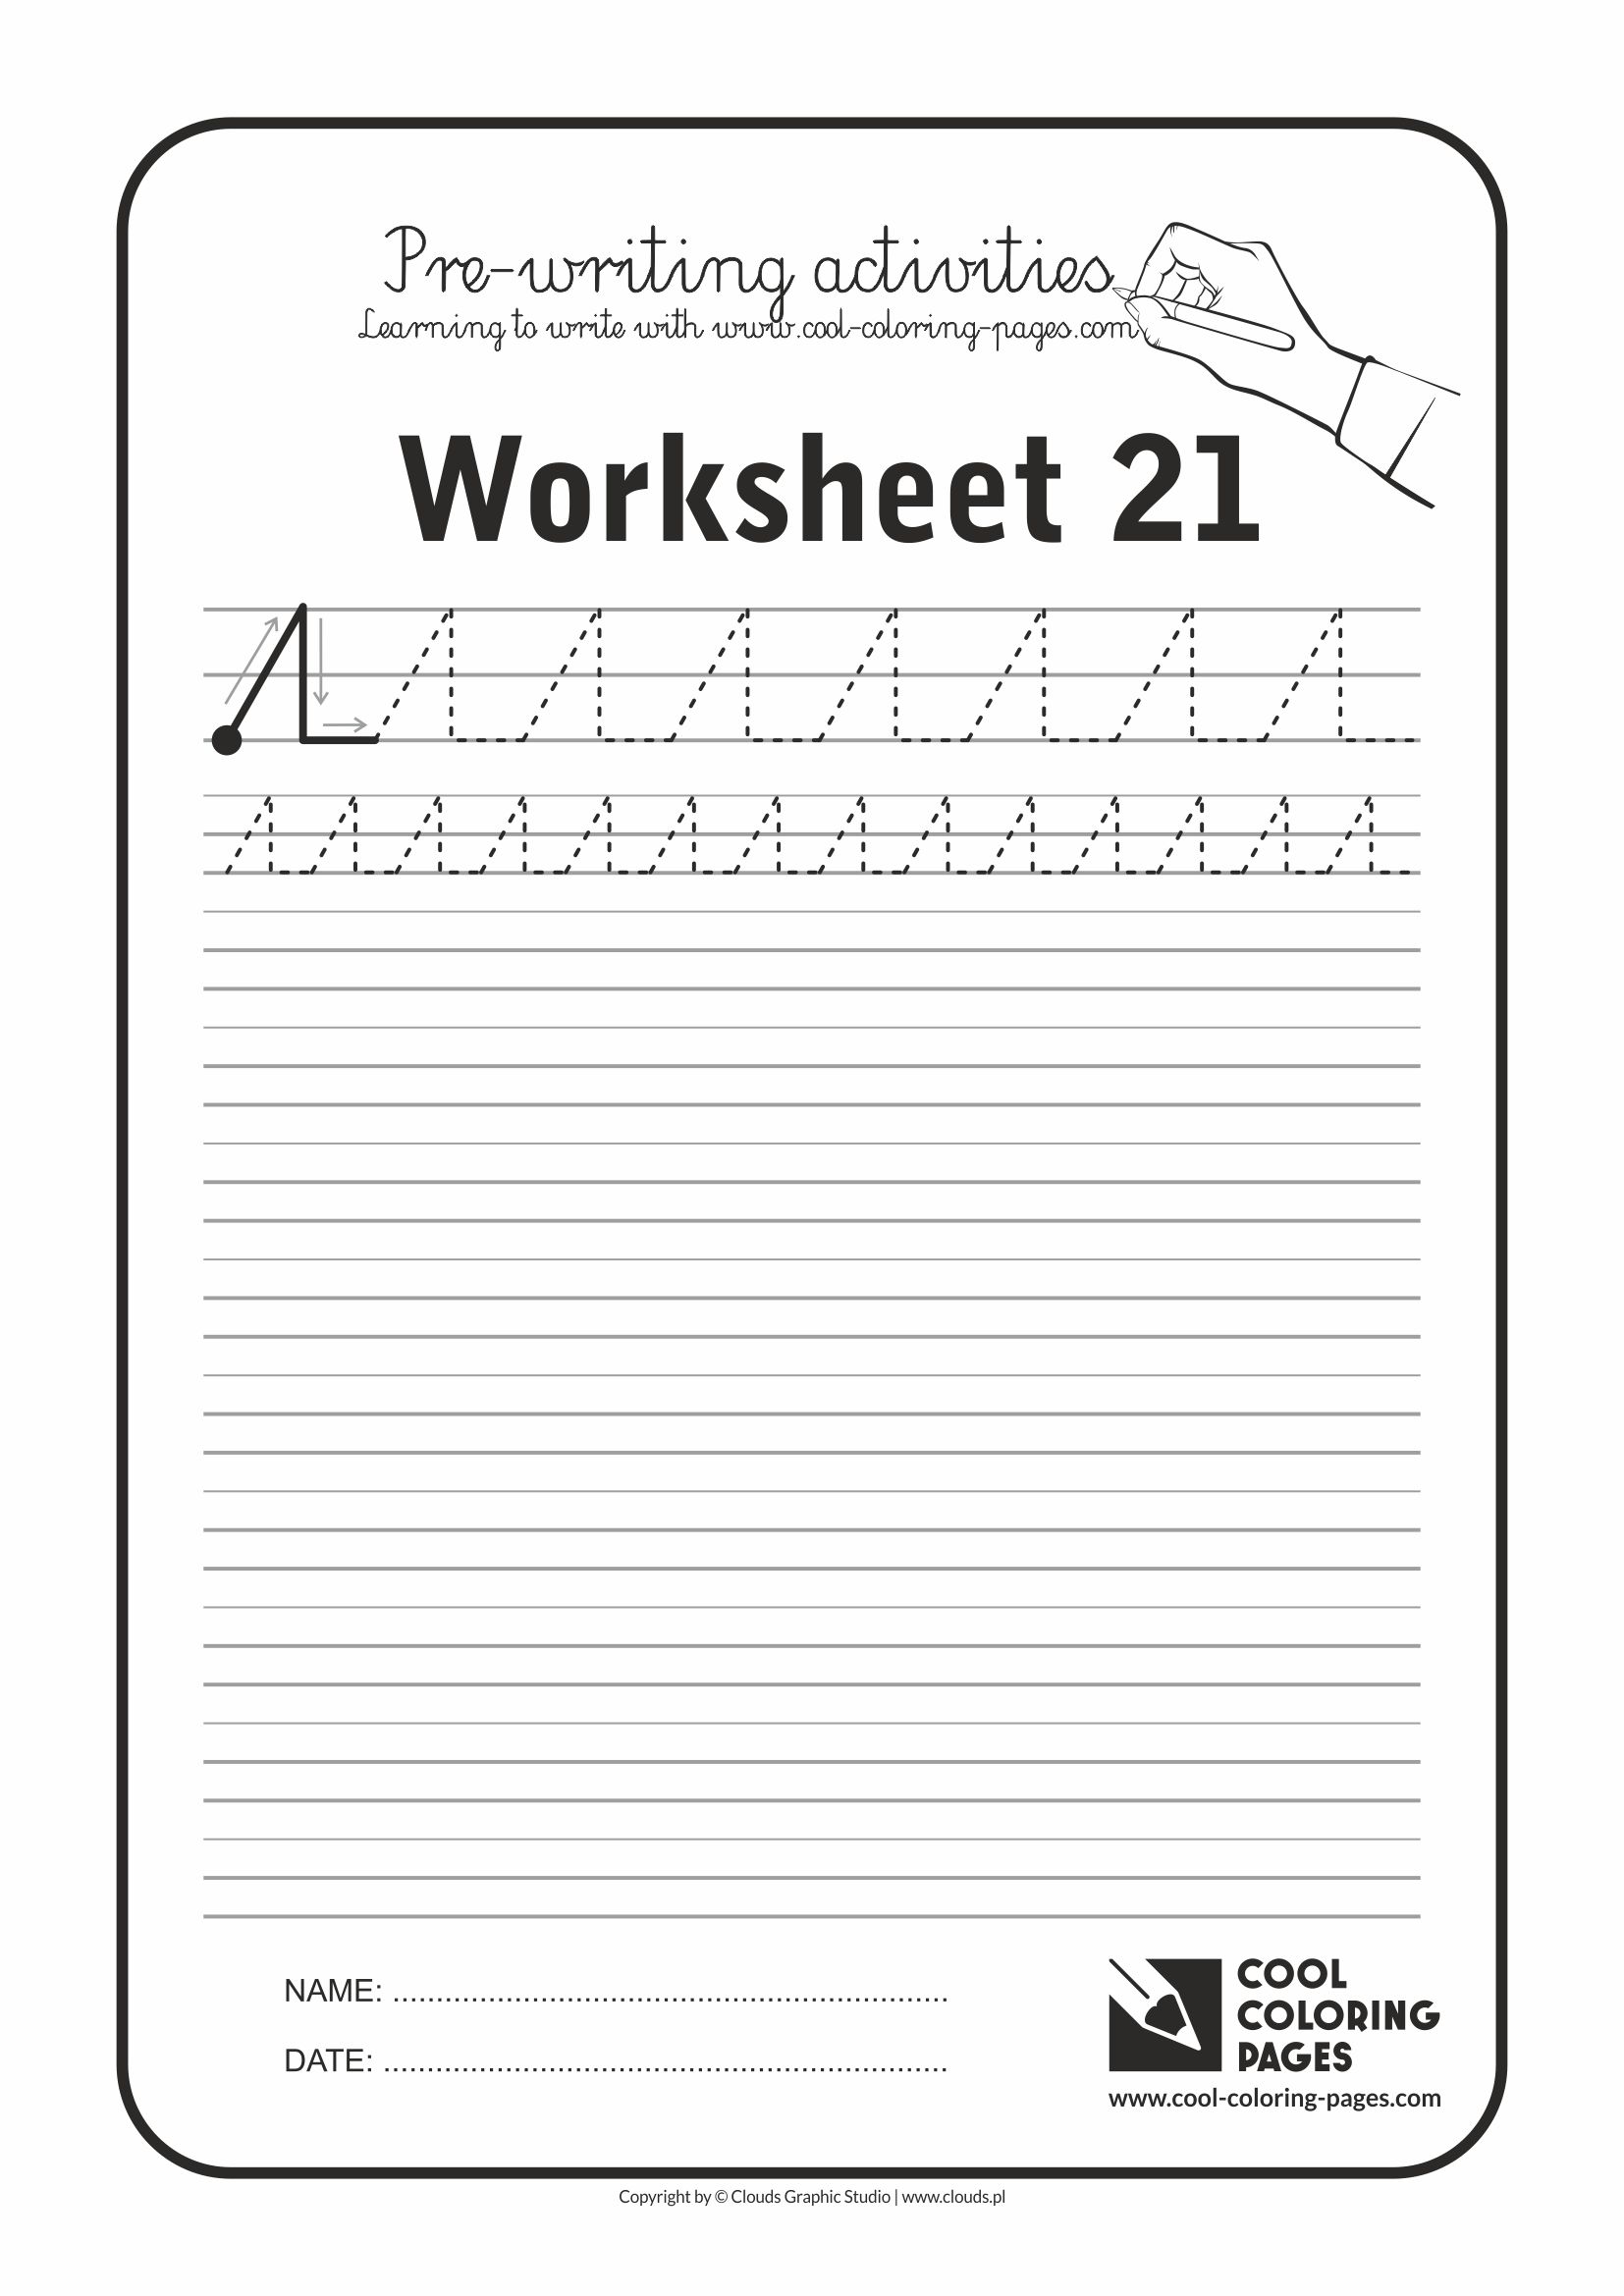 Cool Coloring Pages / Pre-writing activities / Worksheet no.21